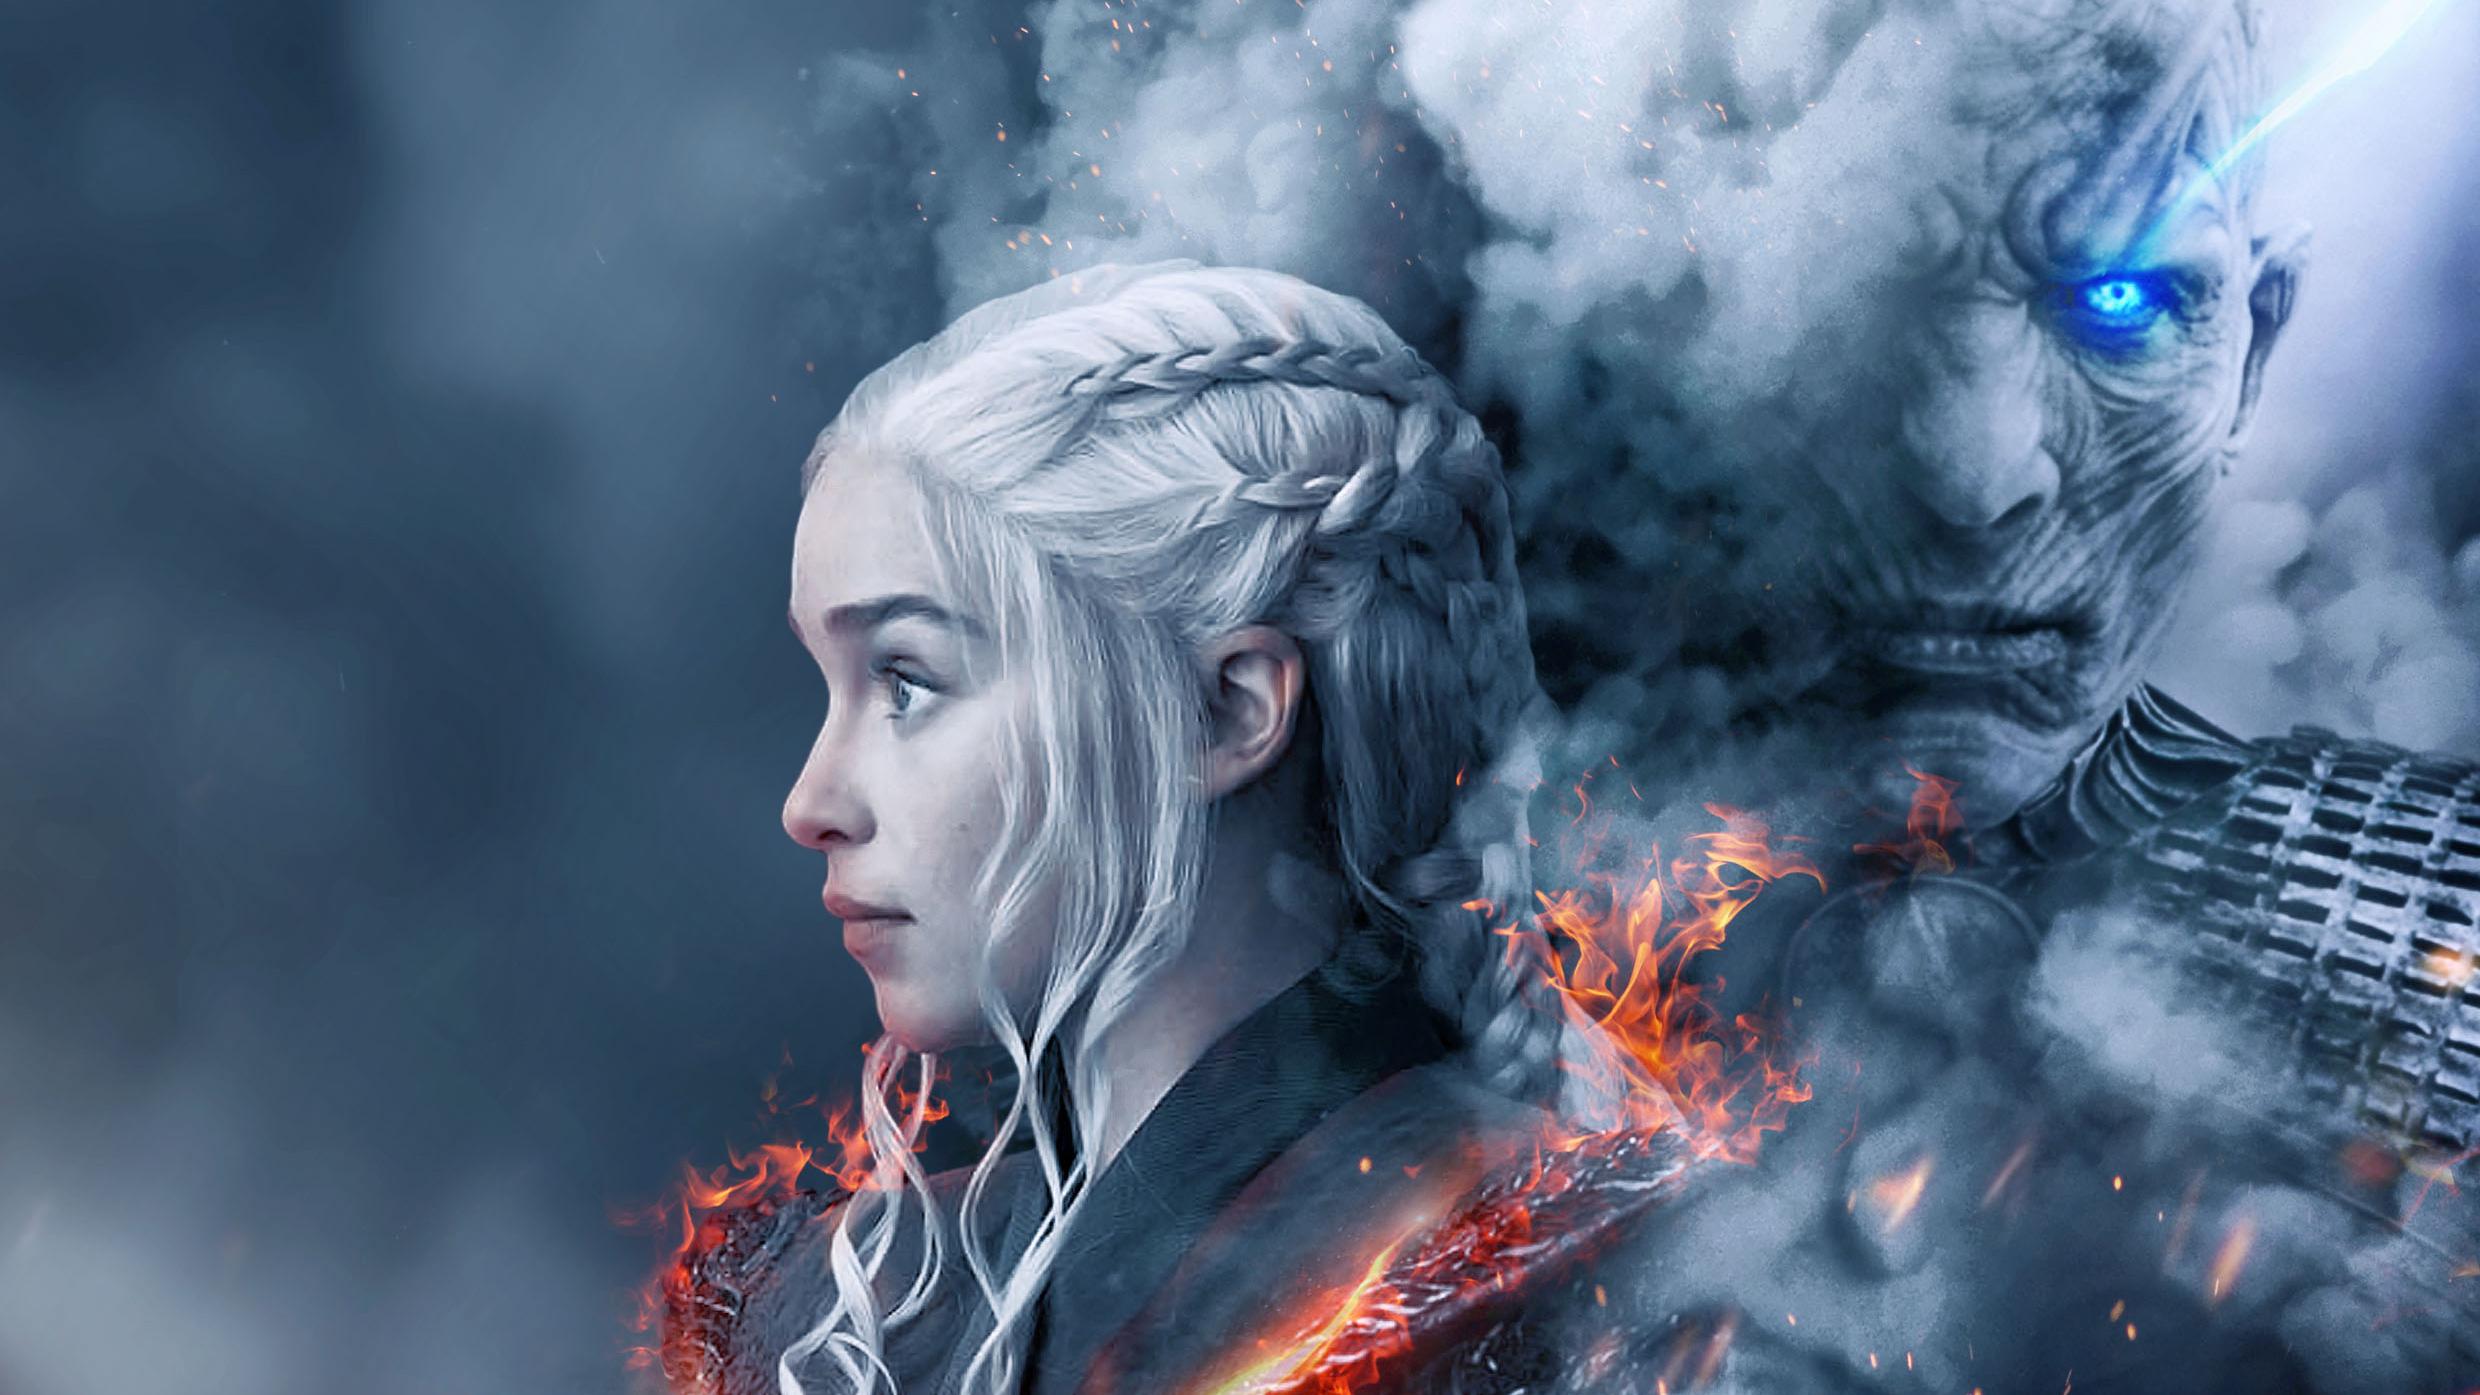 2480 x 1395 · jpeg - Game Of Thrones Season 8 Wallpaper 4K/HD For Mobile and PC